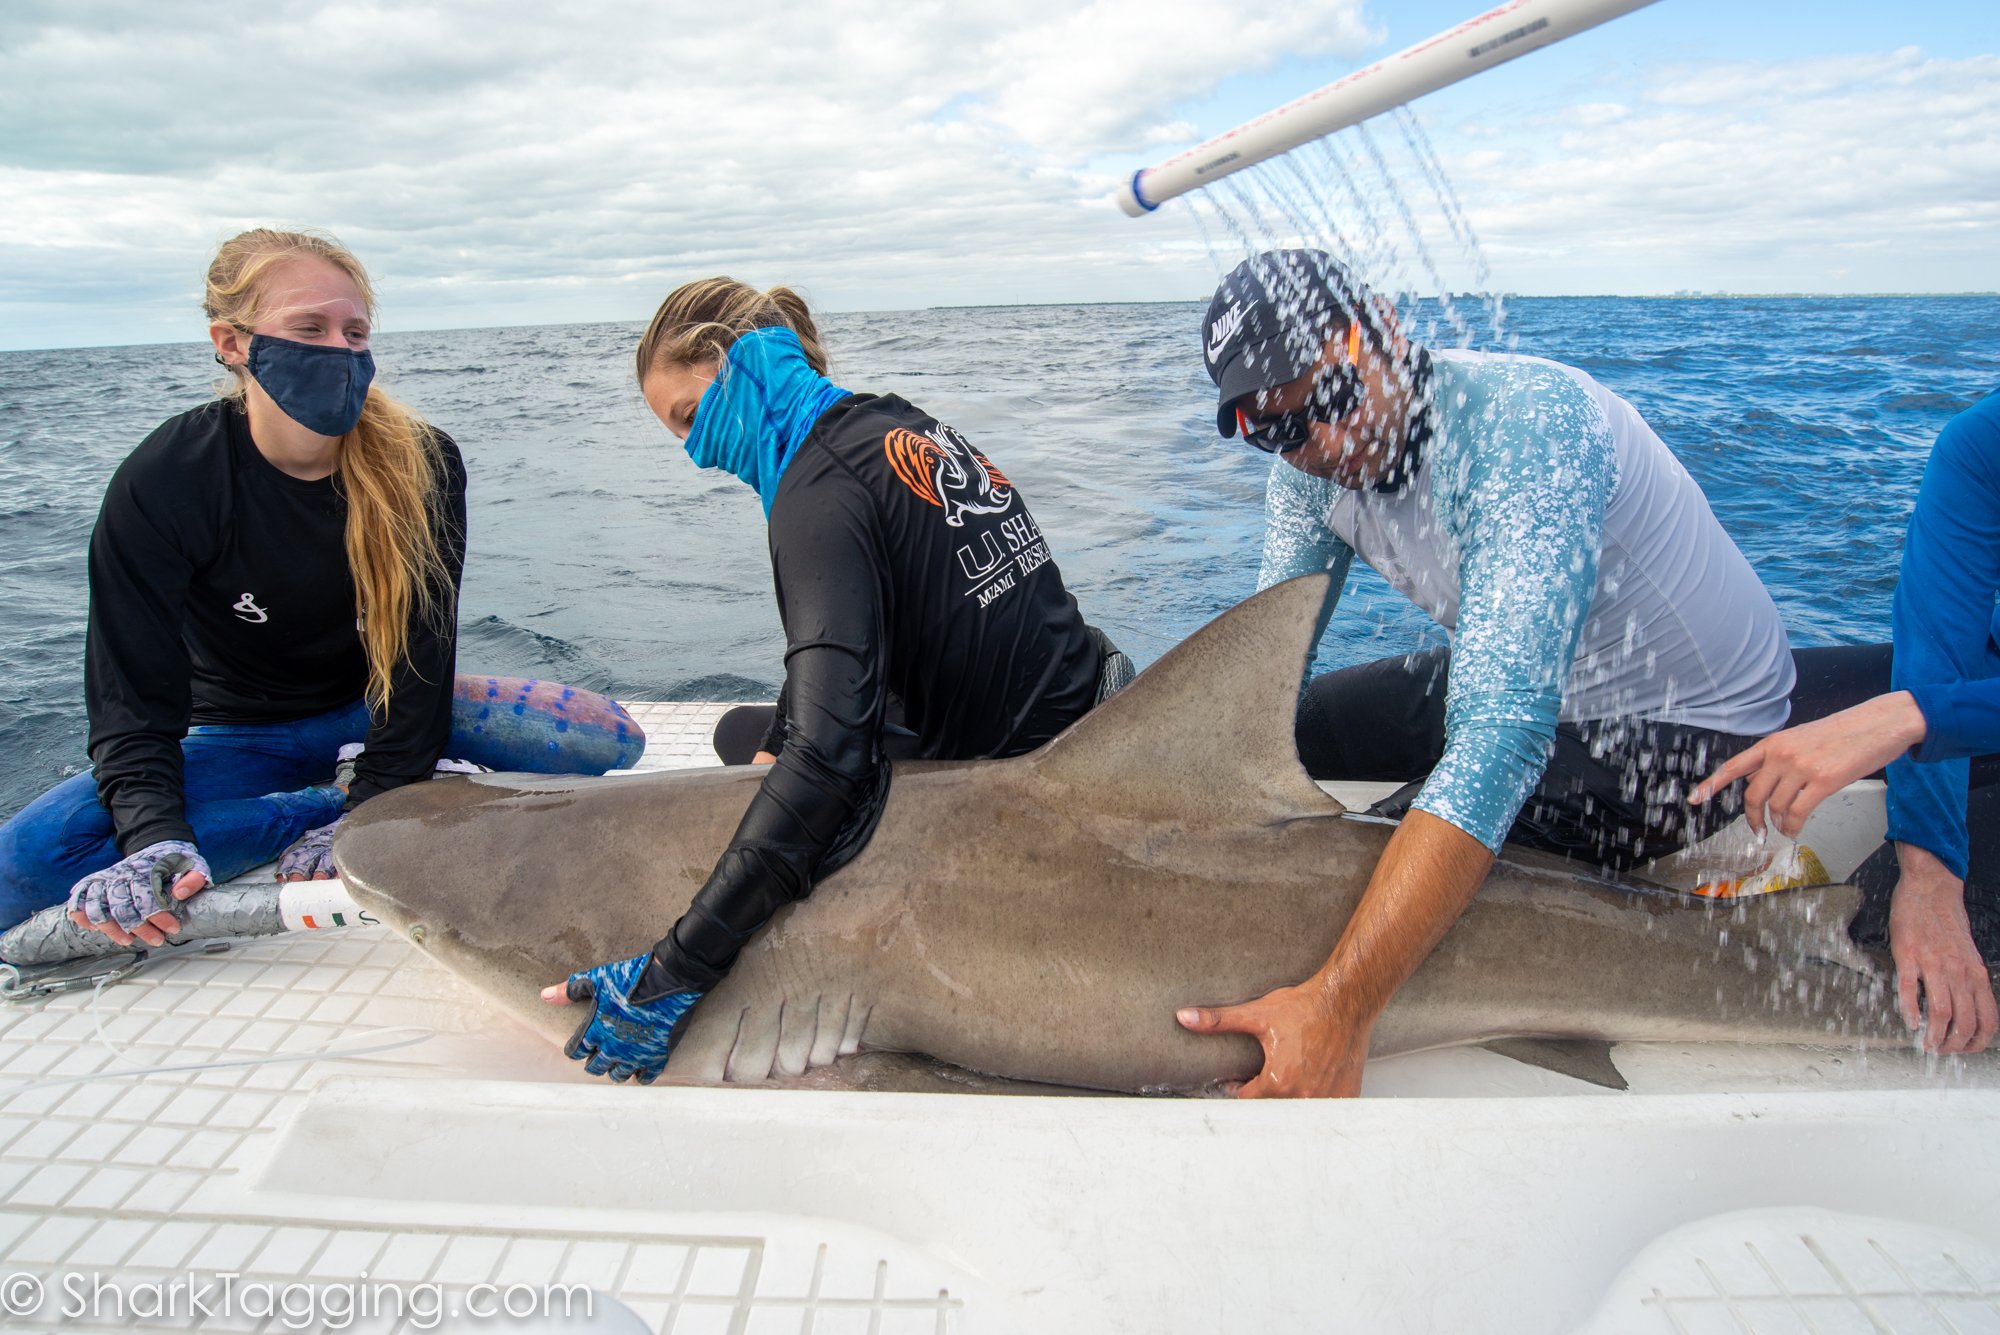 A water pumps provides a flow of continuous water through the mouth and a second hose is used to hydrate sharks body